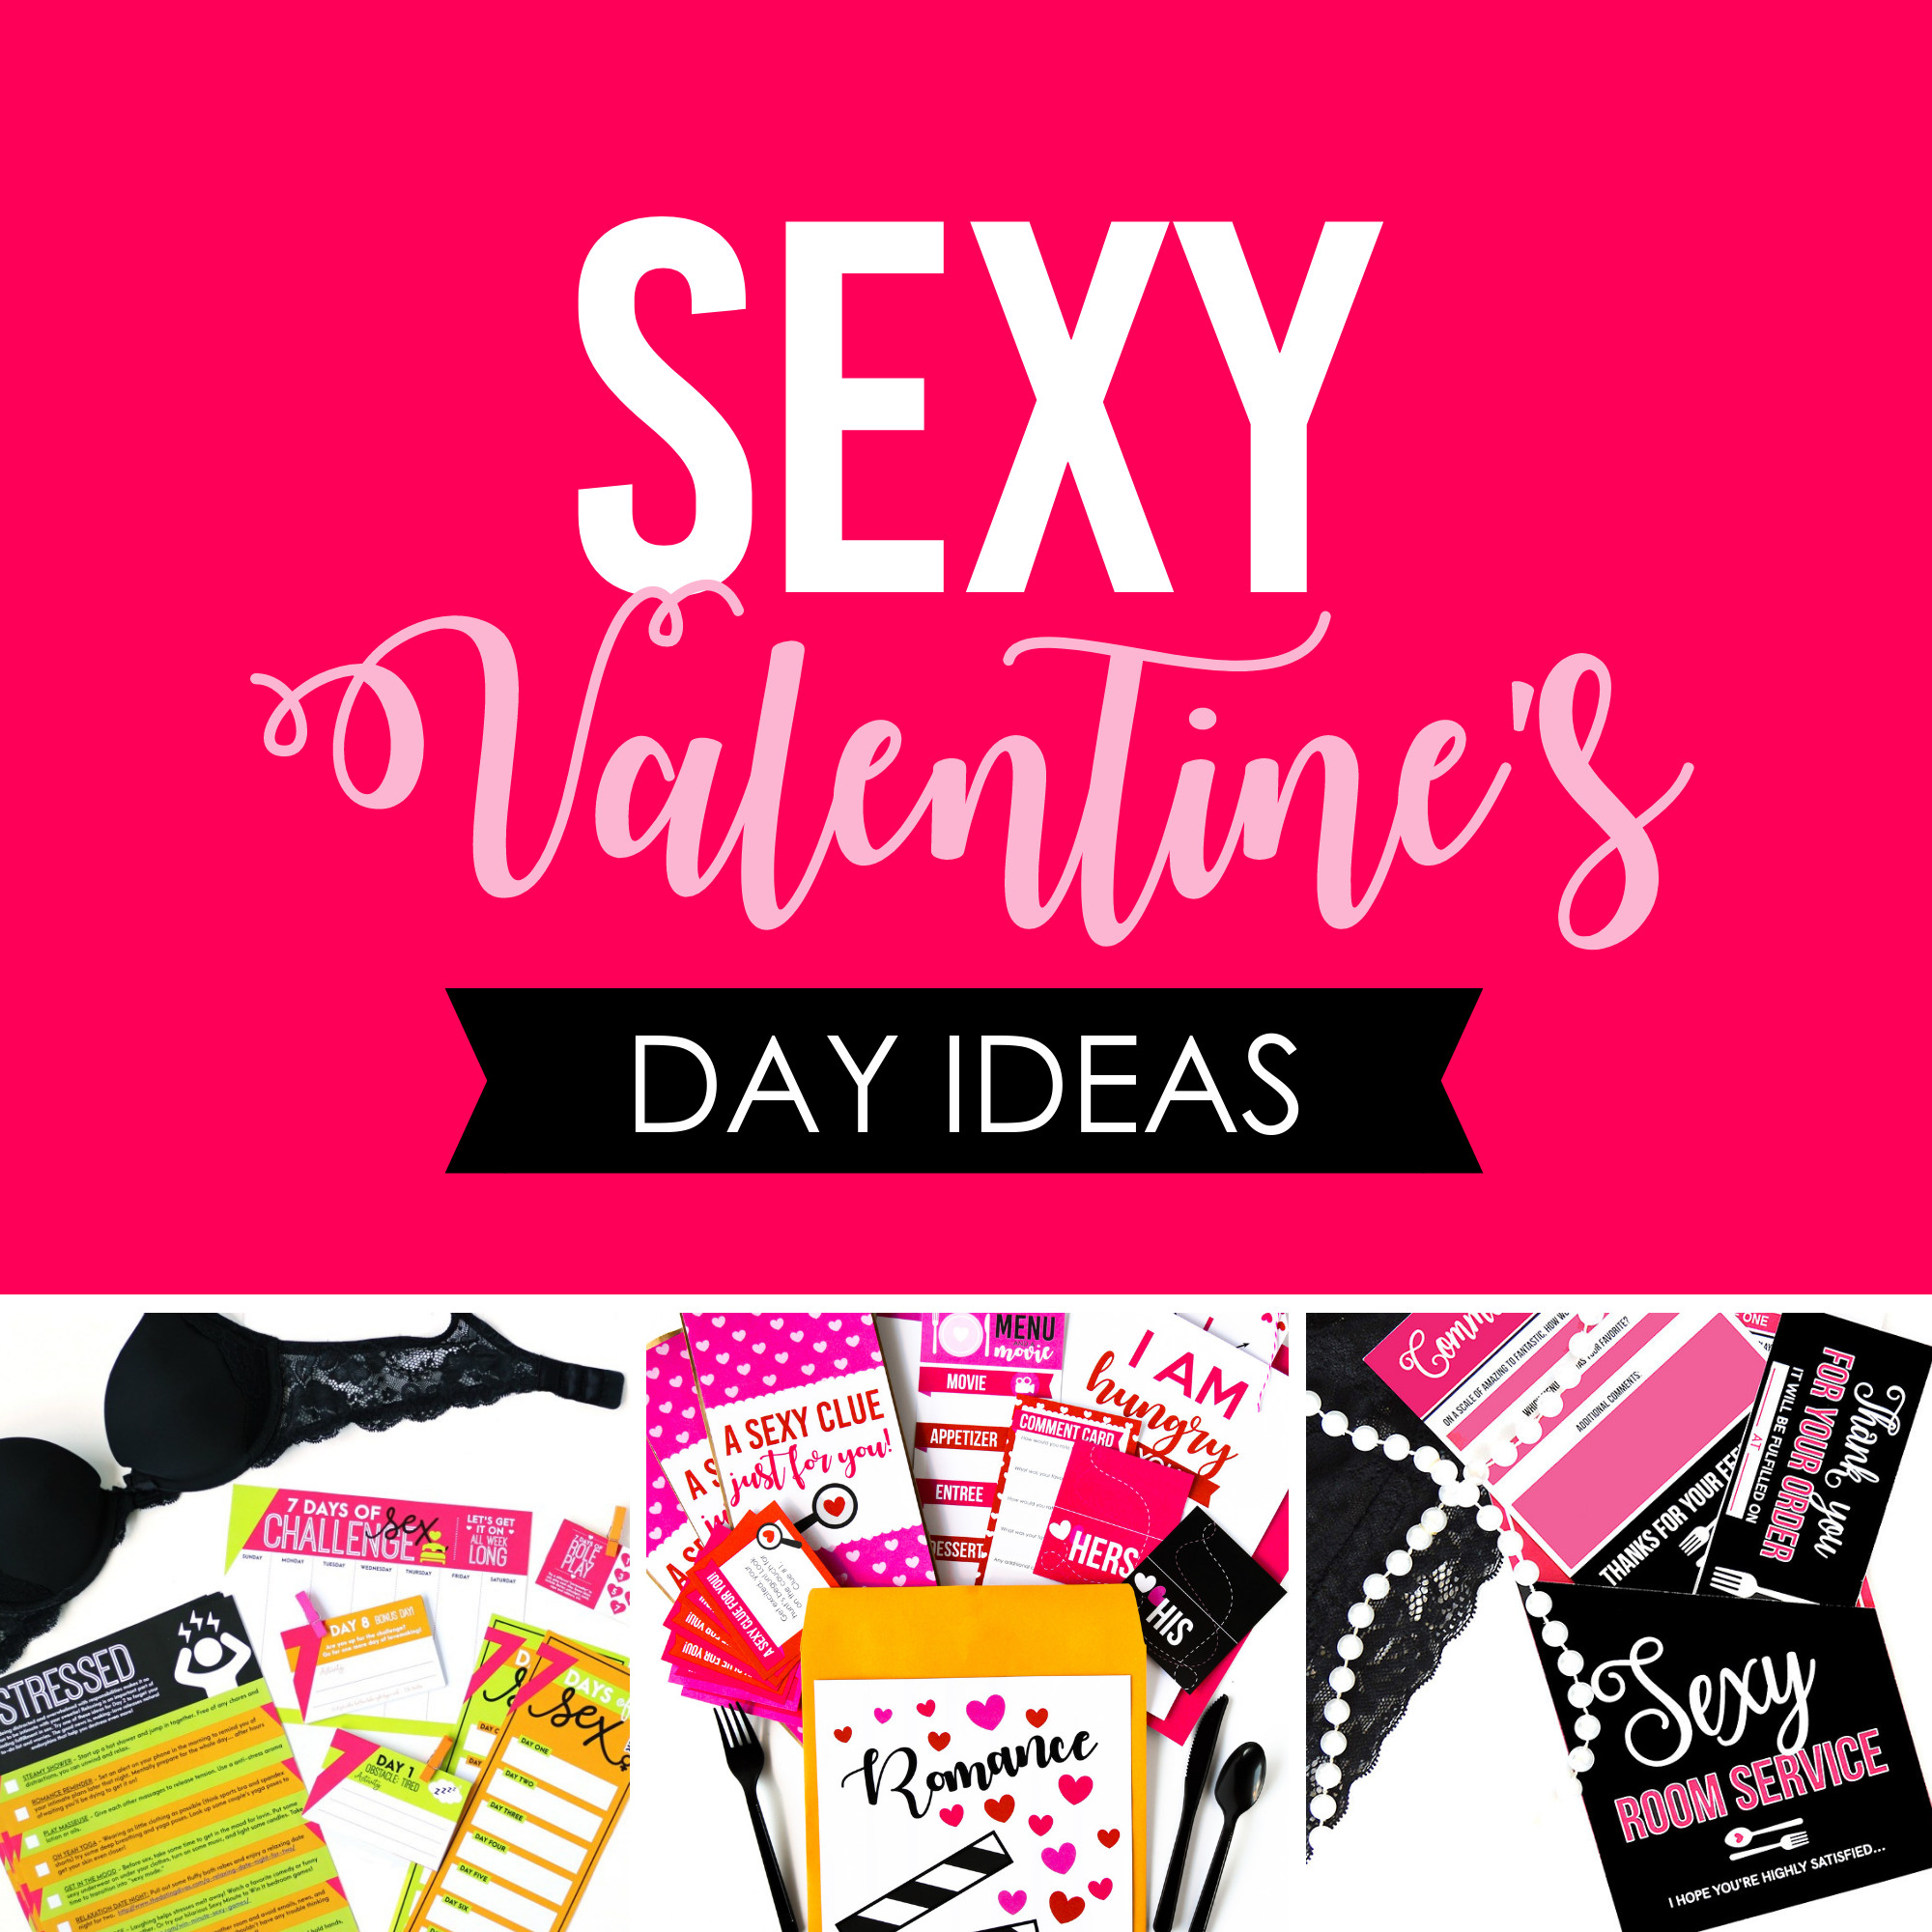 Sexy Valentines Day Gifts
 y Valentine s Day Ideas for Everyone From The Dating